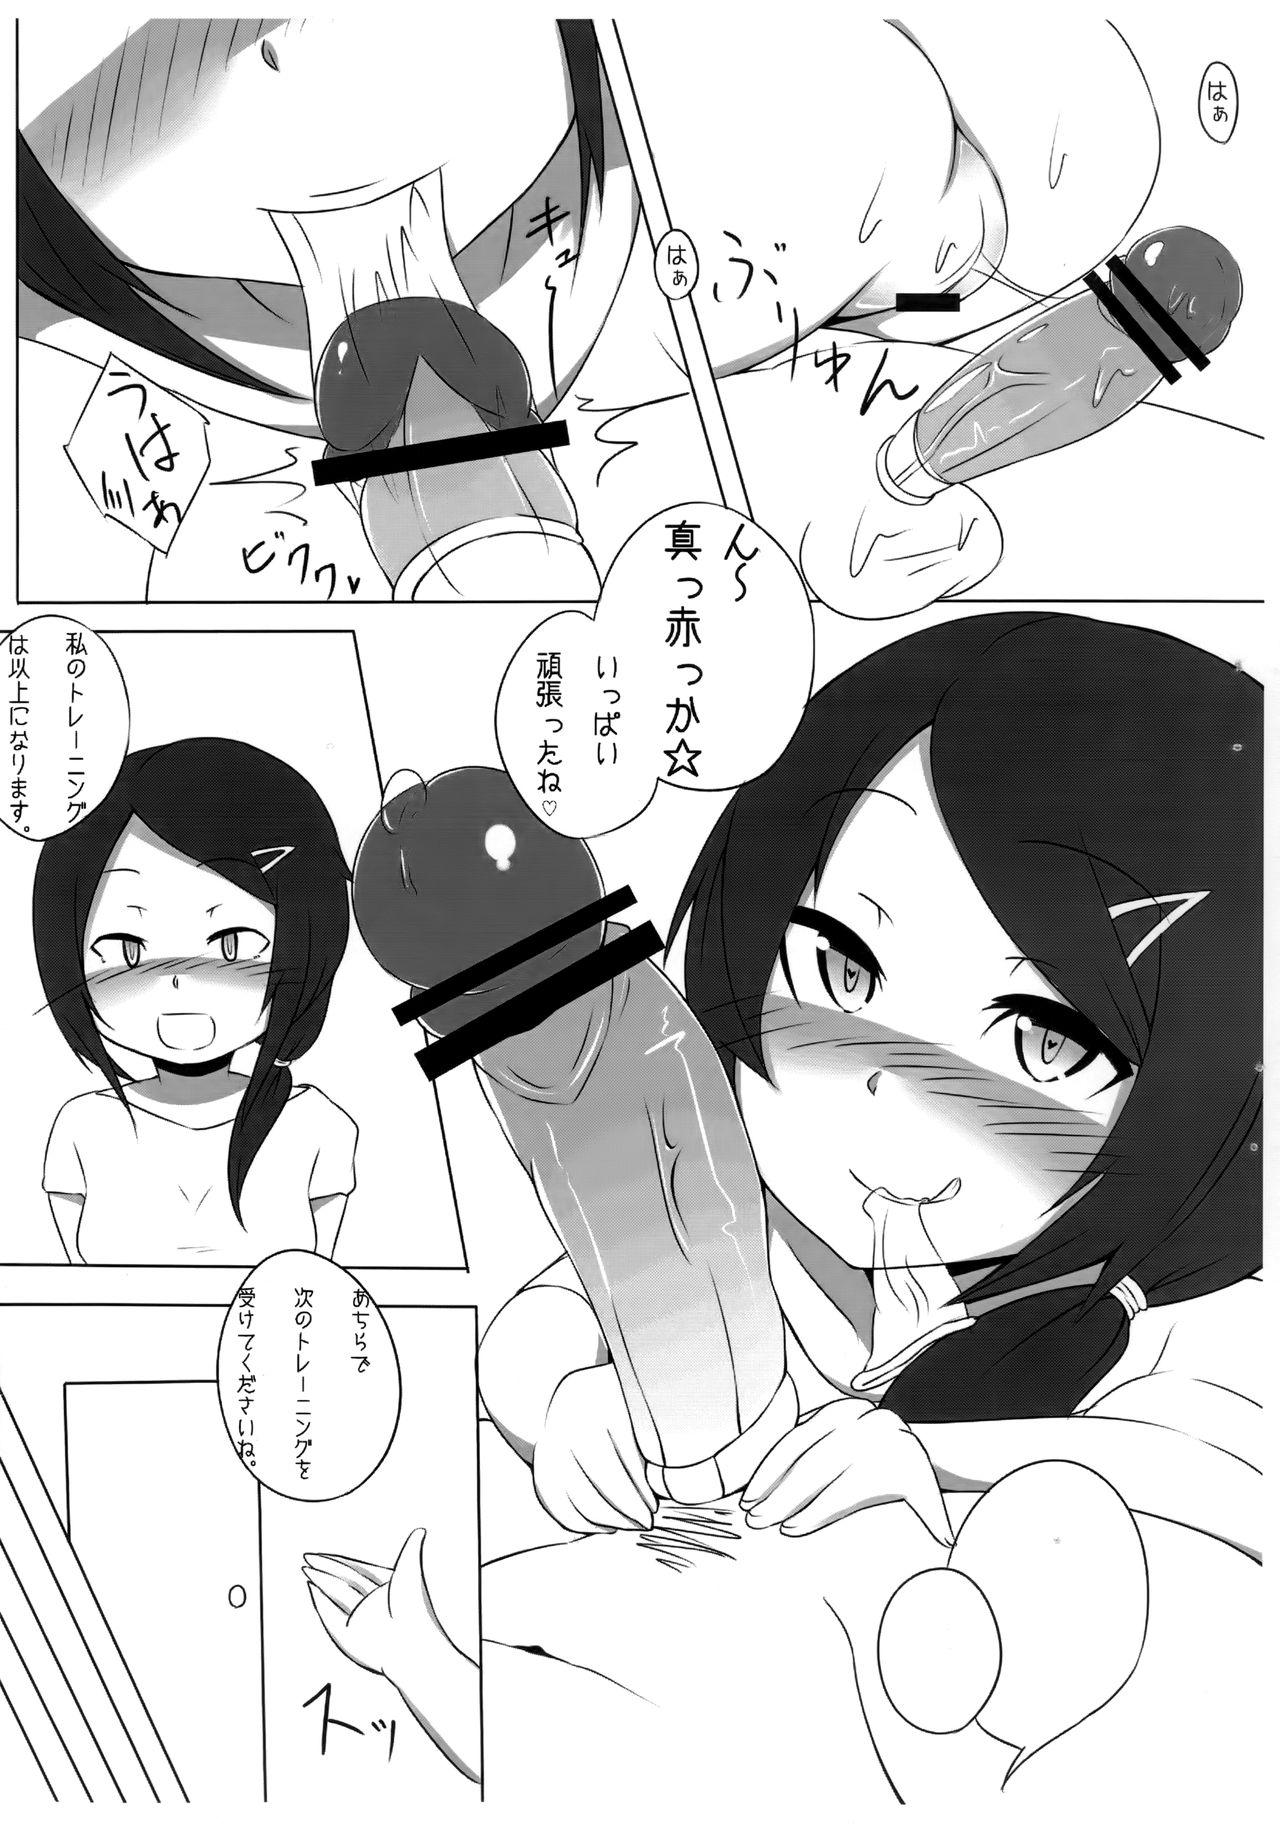 Whipping Let's tranning - The idolmaster Sapphic Erotica - Page 9